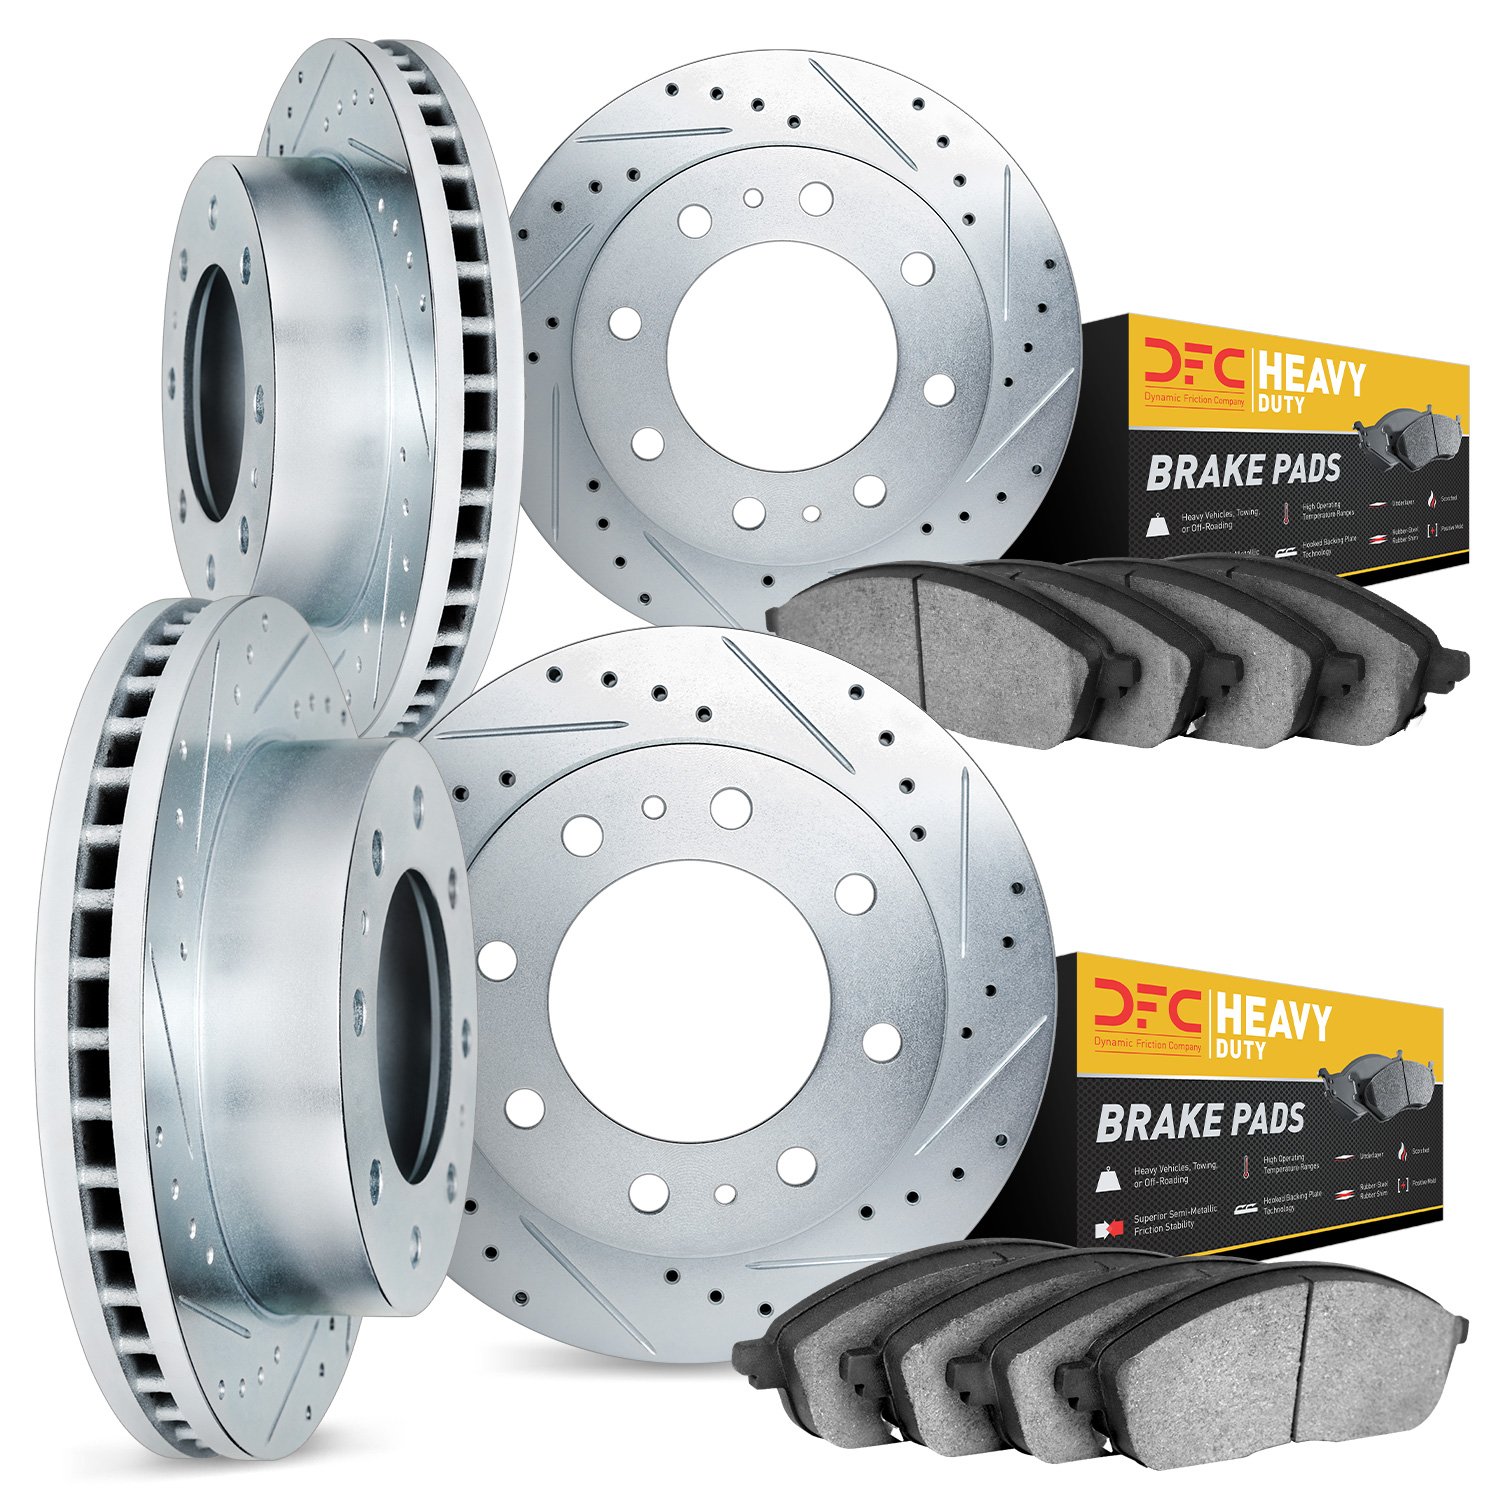 7204-99106 Drilled/Slotted Rotors w/Heavy-Duty Brake Pads Kit [Silver], Fits Select Ford/Lincoln/Mercury/Mazda, Position: Front